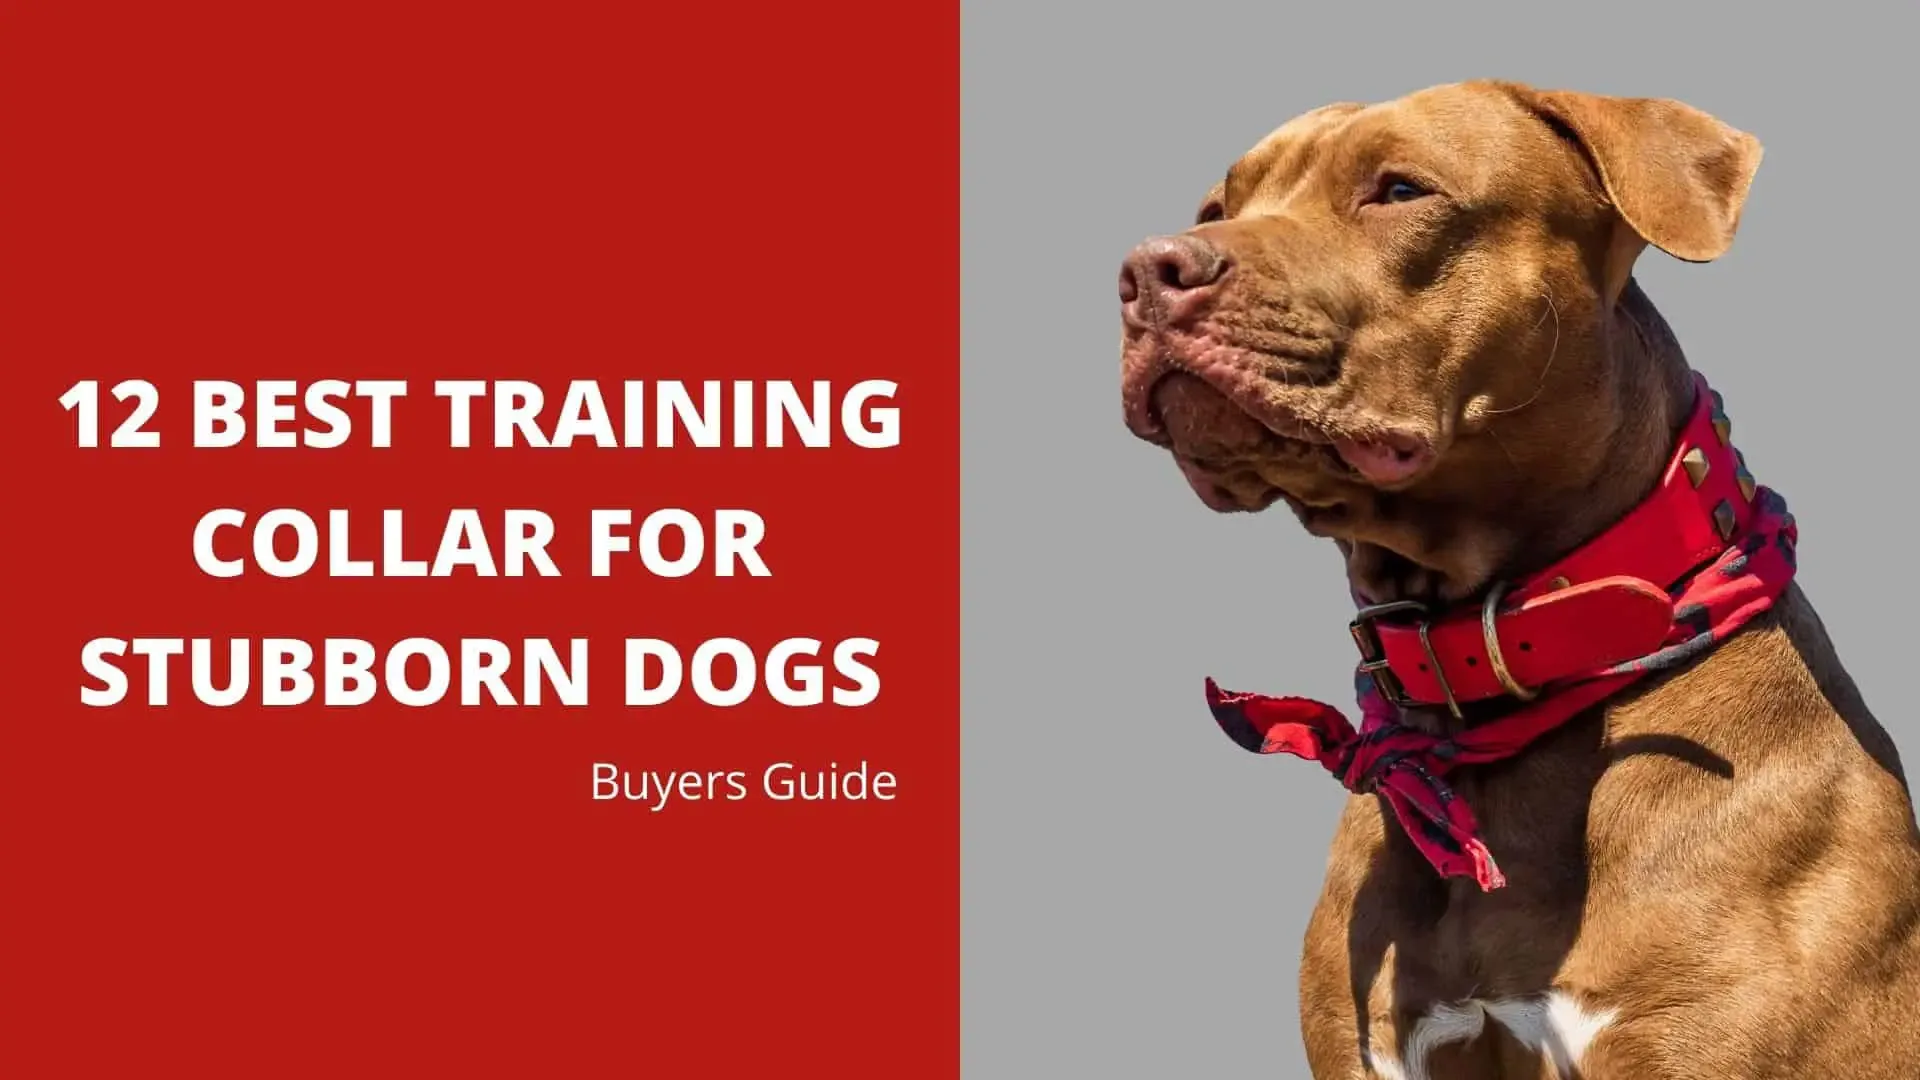 12 Best Training Collar For Stubborn Dogs | Buyers Guide